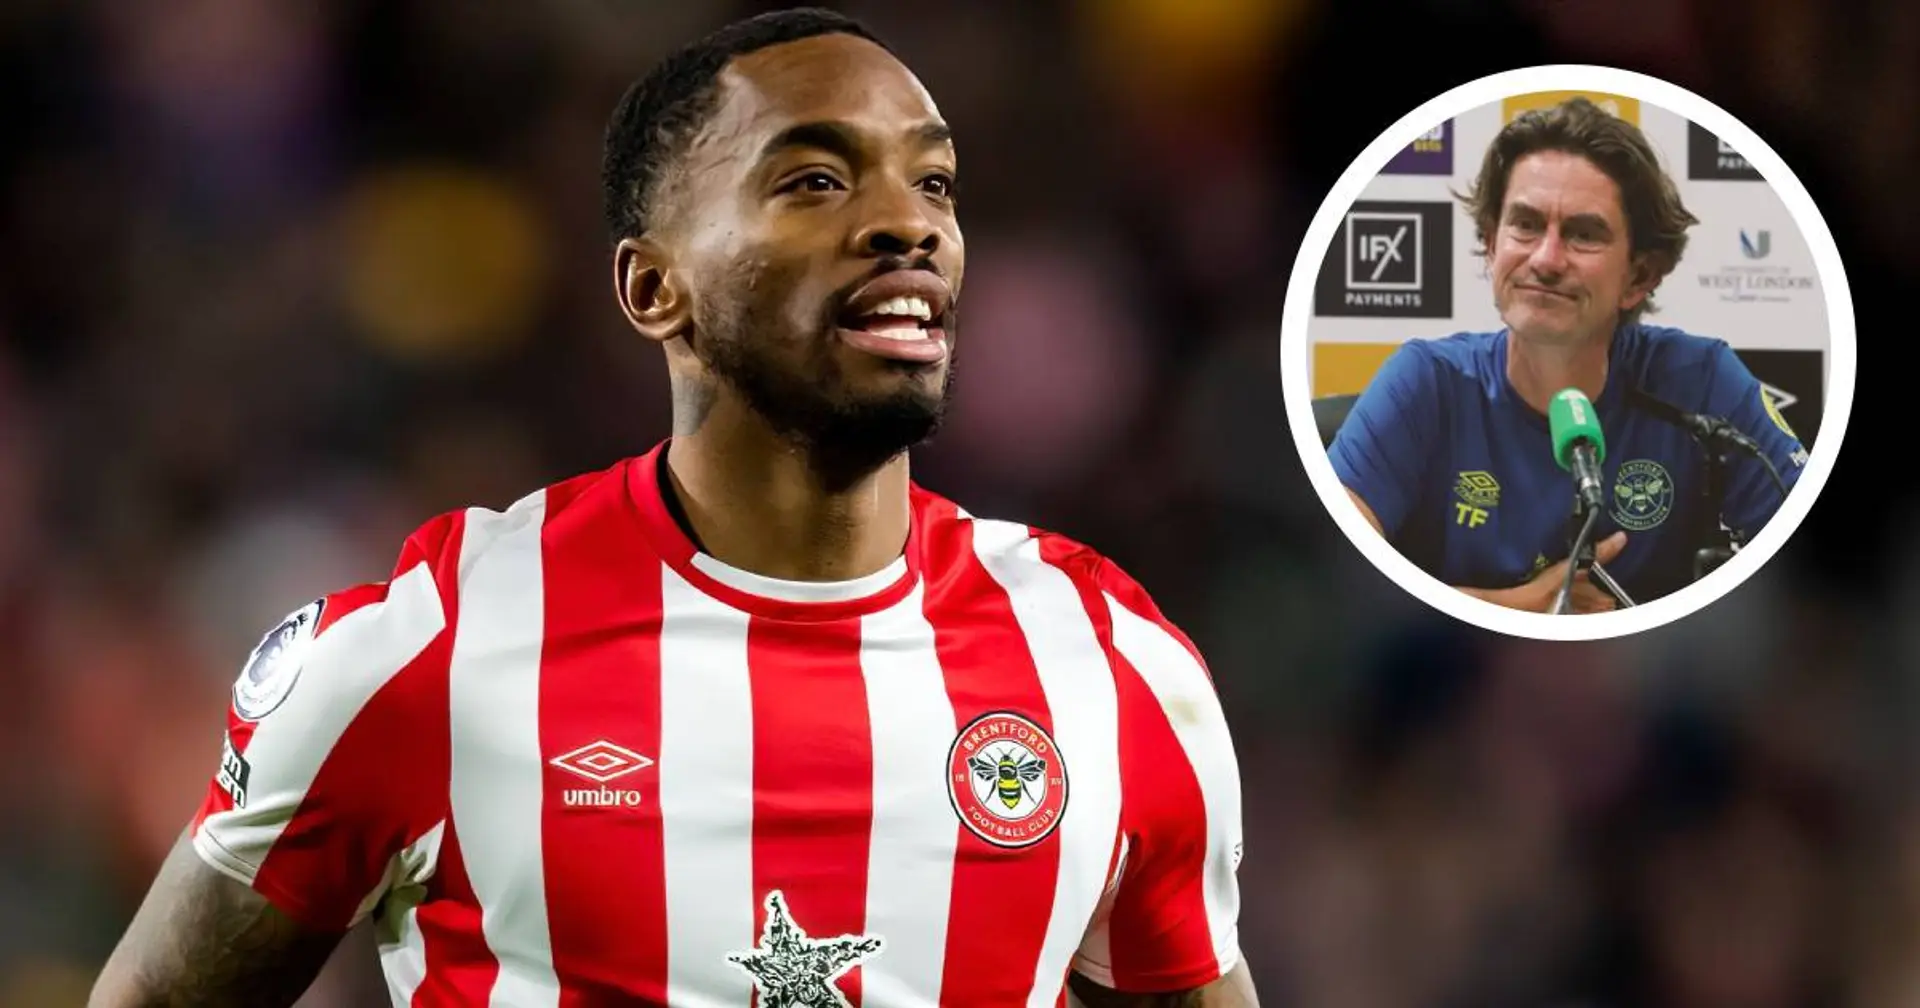 Brentford boss Thomas Frank: 'It’s obvious Ivan Toney will be sold this summer'